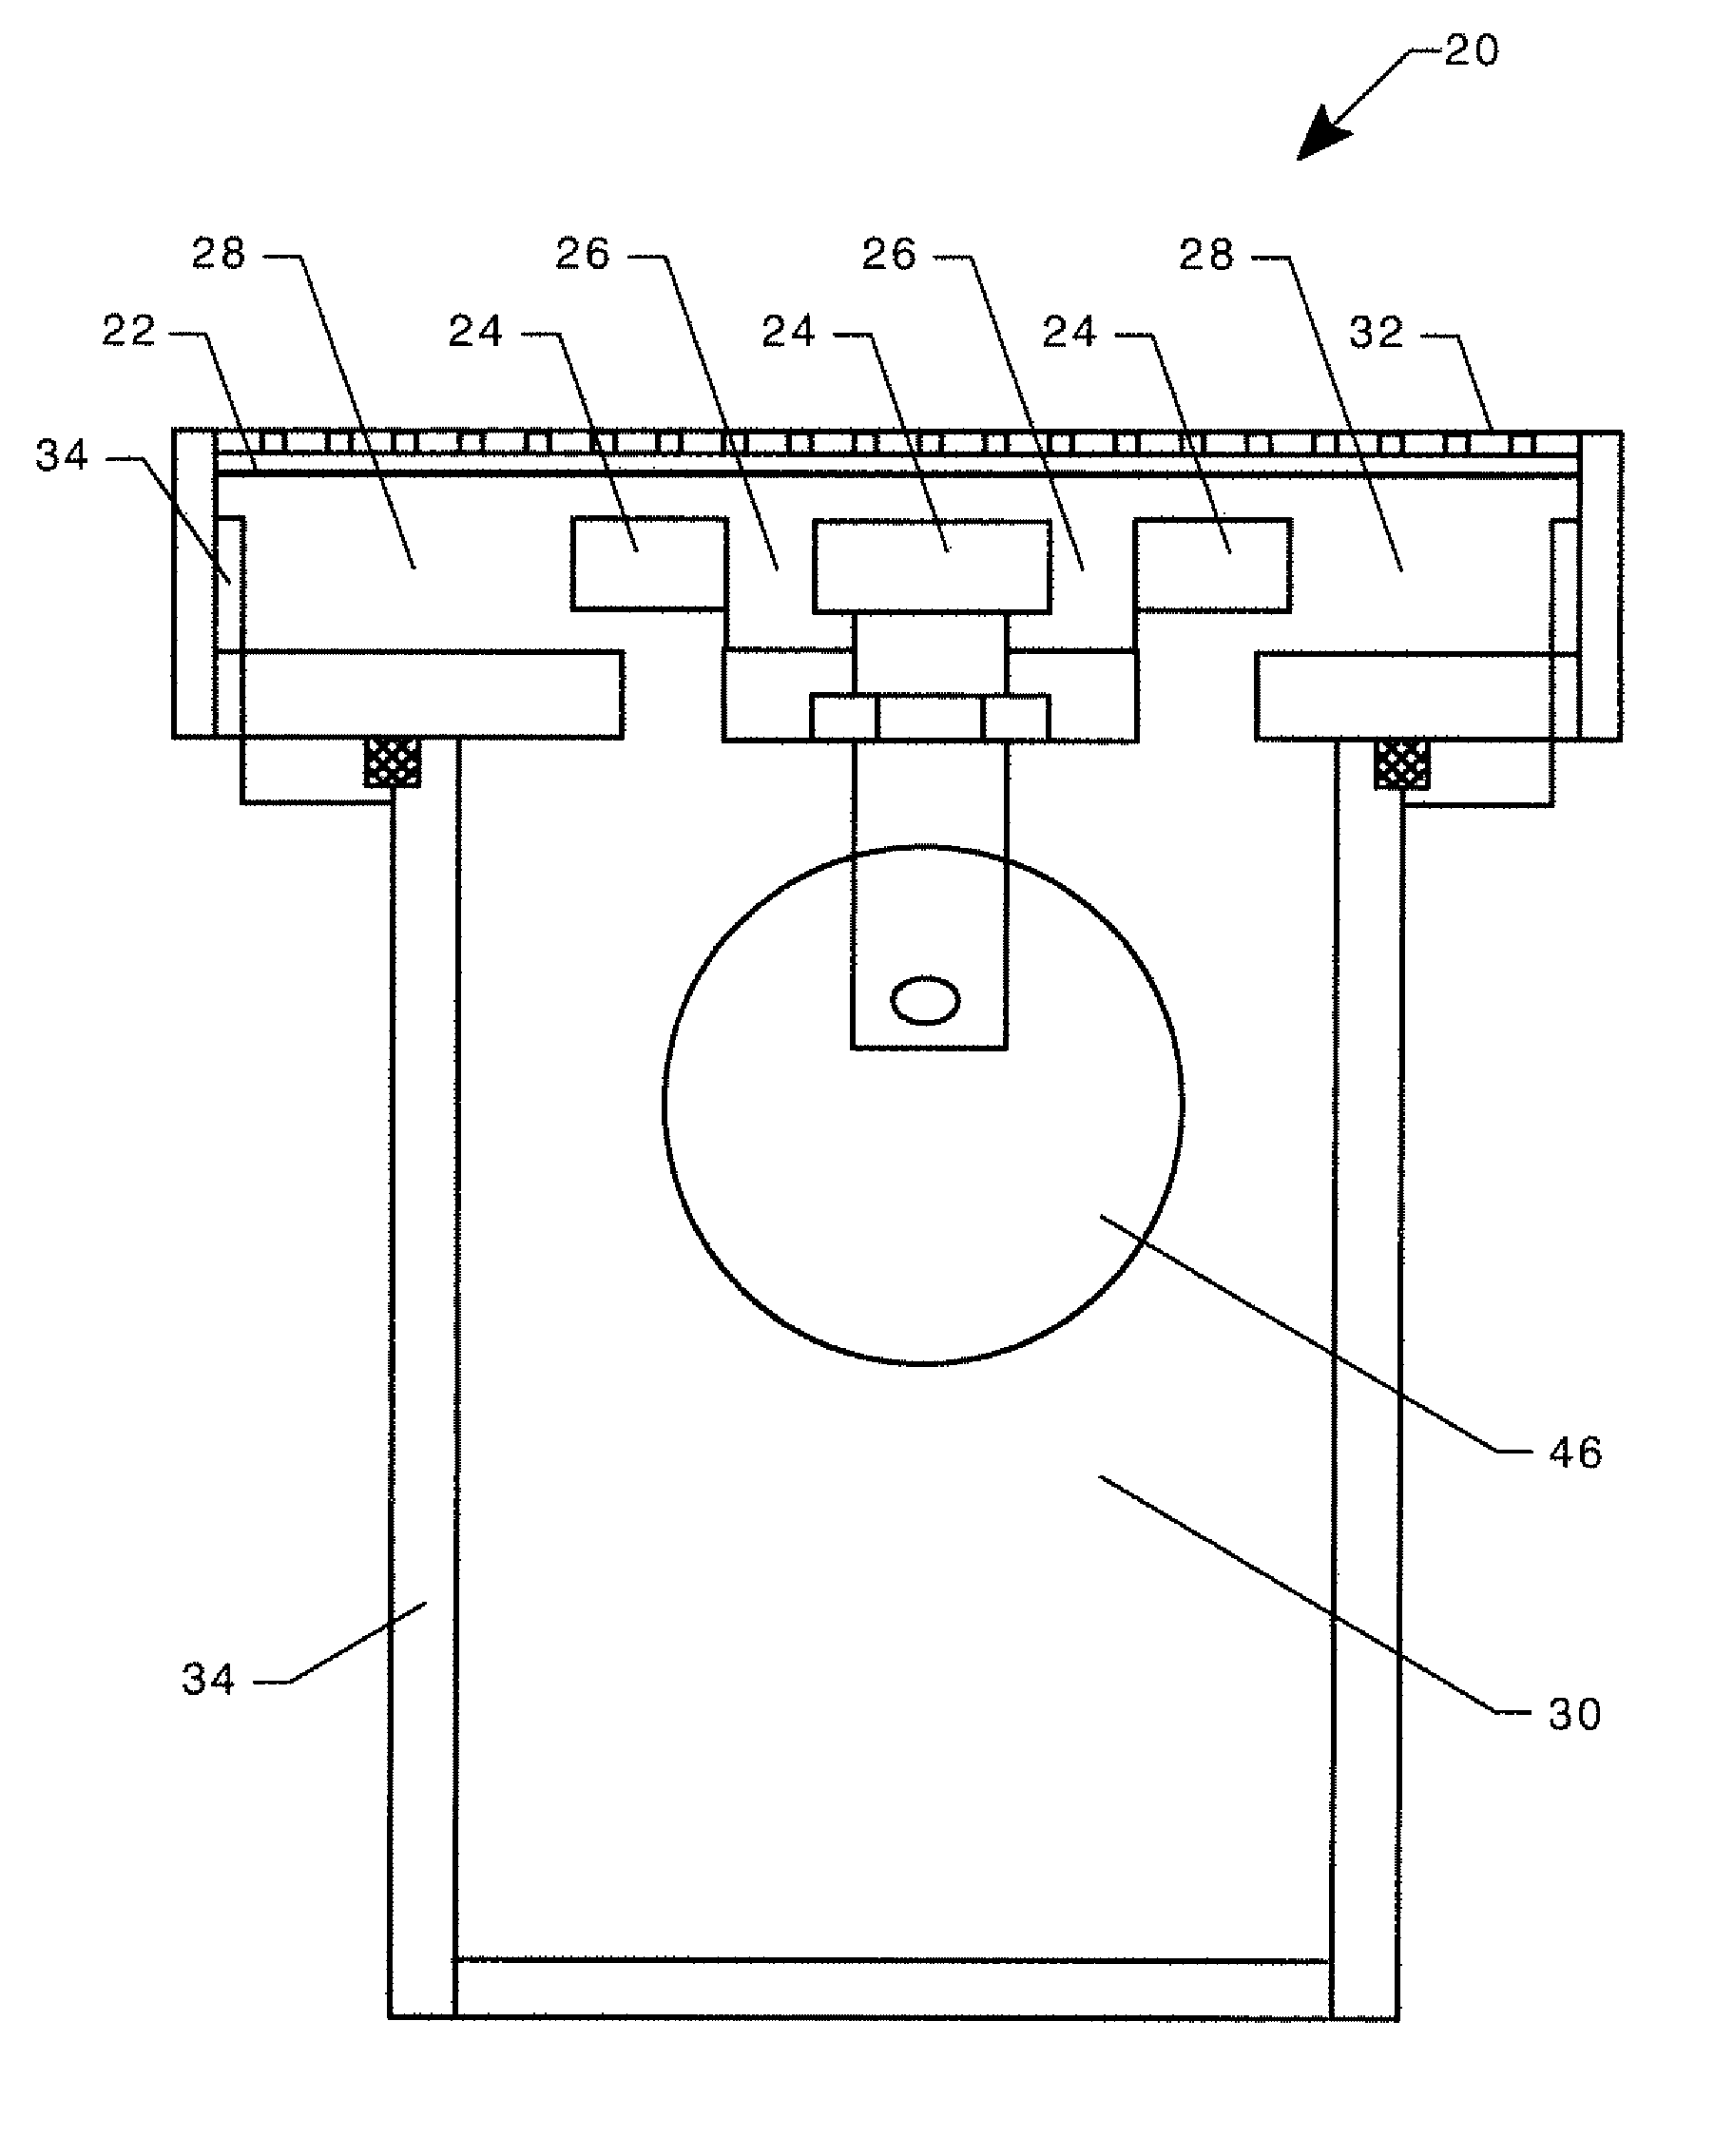 Extreme low frequency acoustic measurement system